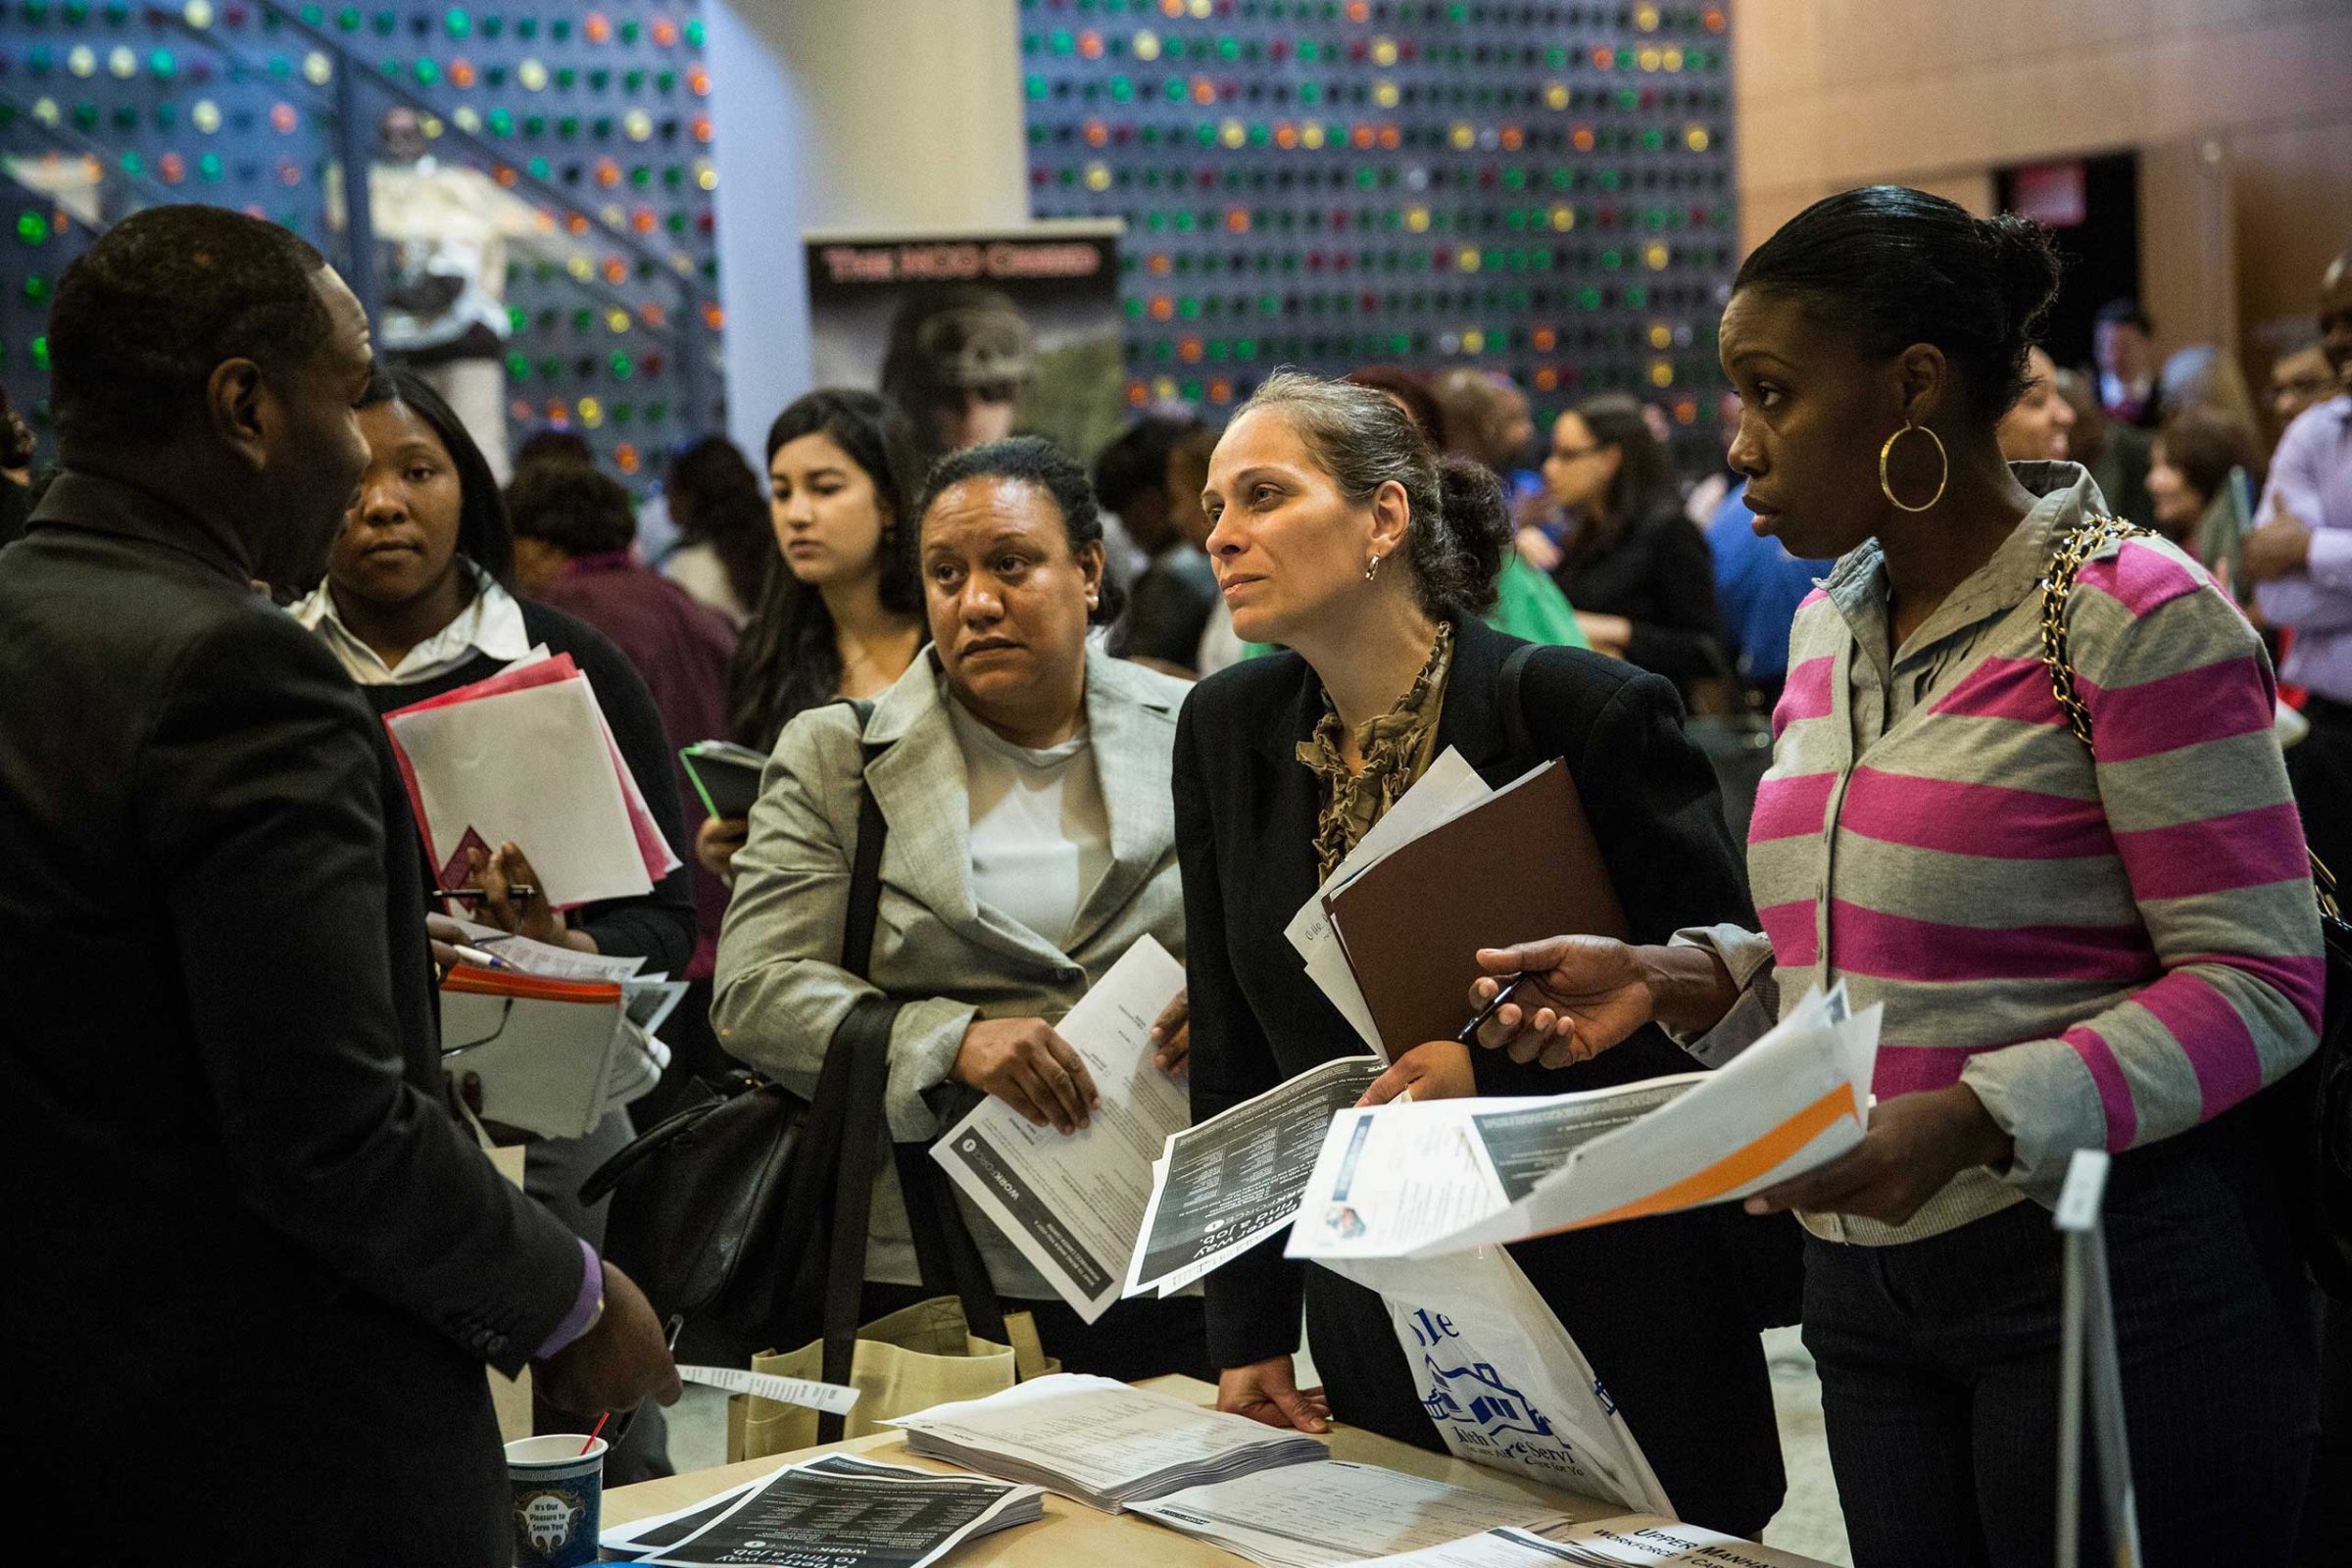 People attend a jobs fair at the Bronx Public Library on Sept. 17, 2014 in the Bronx Borough of New York City.